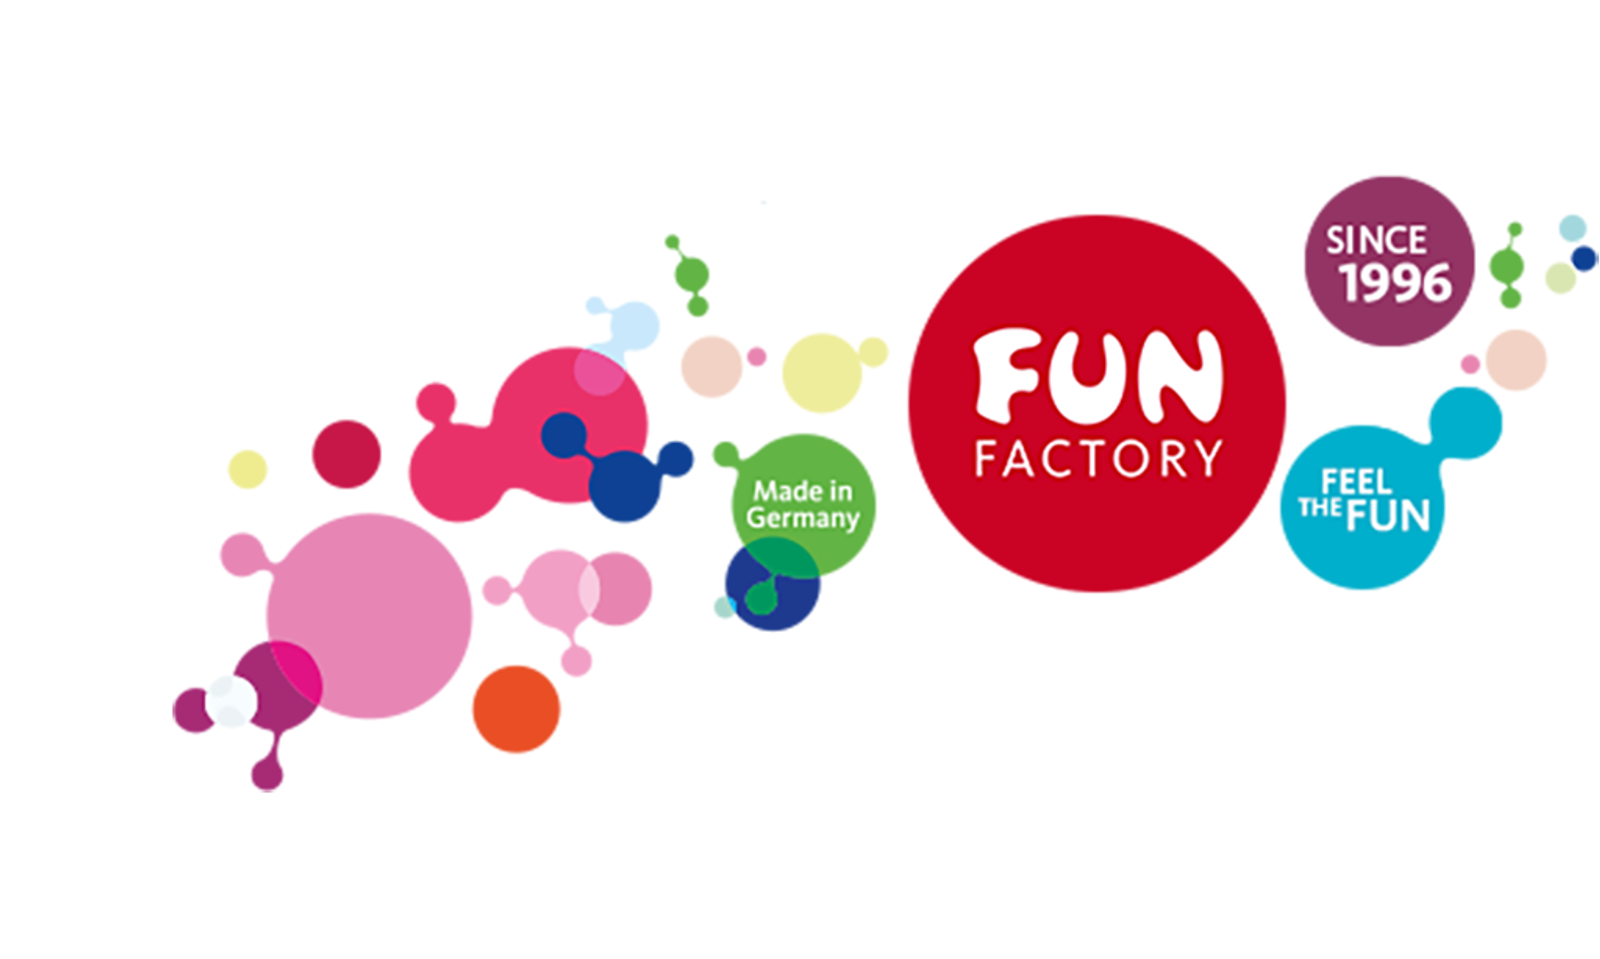 Fun Factory USA to Host Workshop on Sex Positivity, Anti-Racism